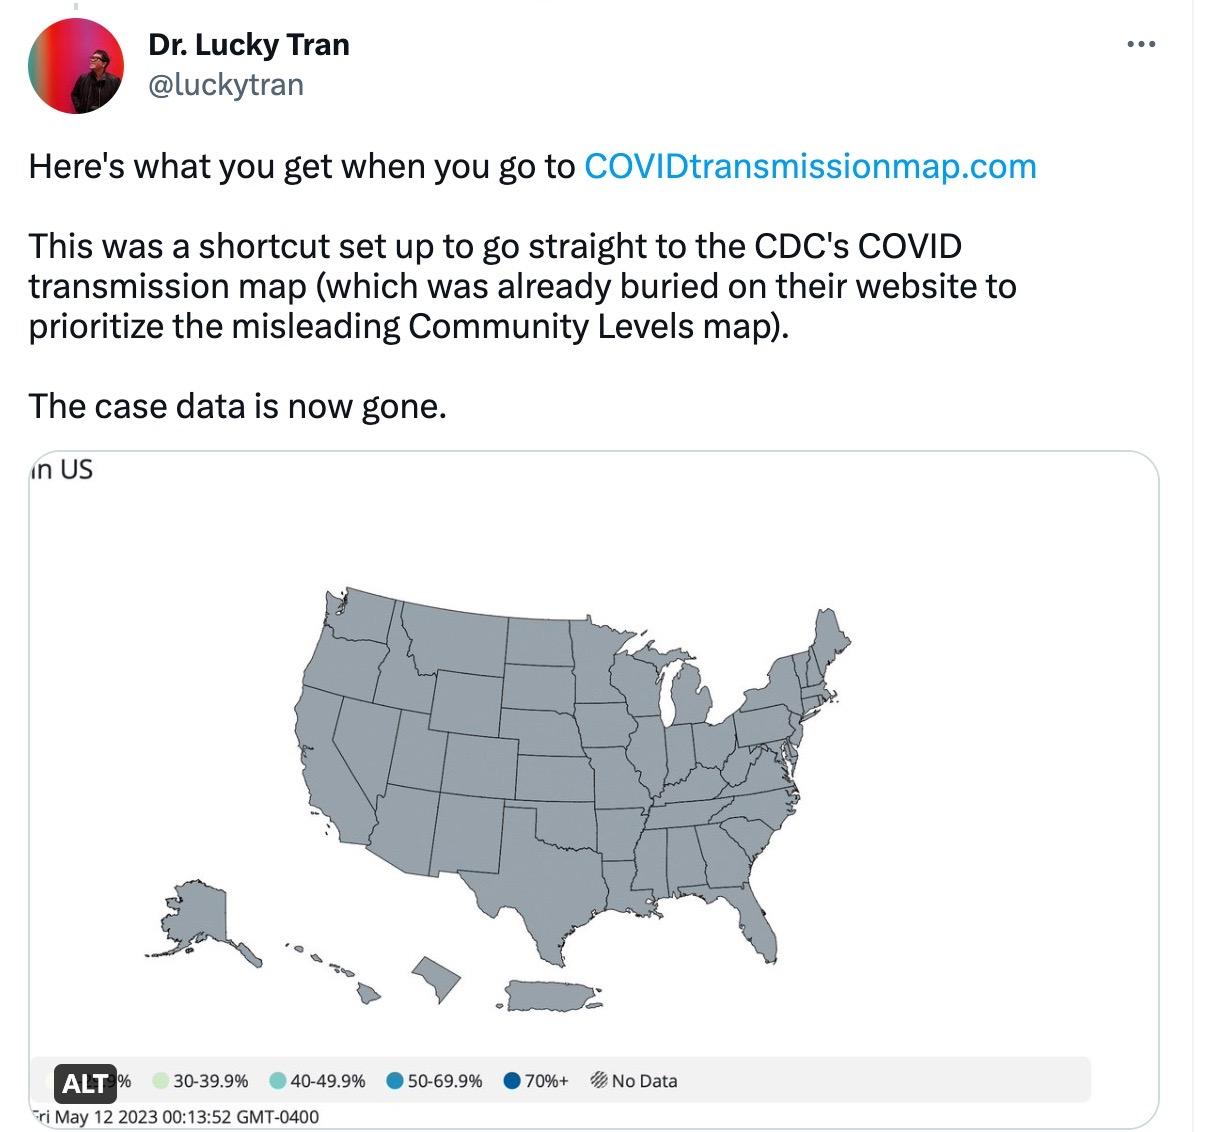 A screenshot of a tweet by Dr. Lucky Tran, posted on May 11, 2023. The text says: "Here's what you get when you go to http://COVIDtransmissionmap.com This was a shortcut set up to go straight to the CDC's COVID transmission map (which was already buried on their website to prioritize the misleading Community Levels map). The case data is now gone."  The tweet displays an image: Grey US map with no data, formerly COVID transmission map